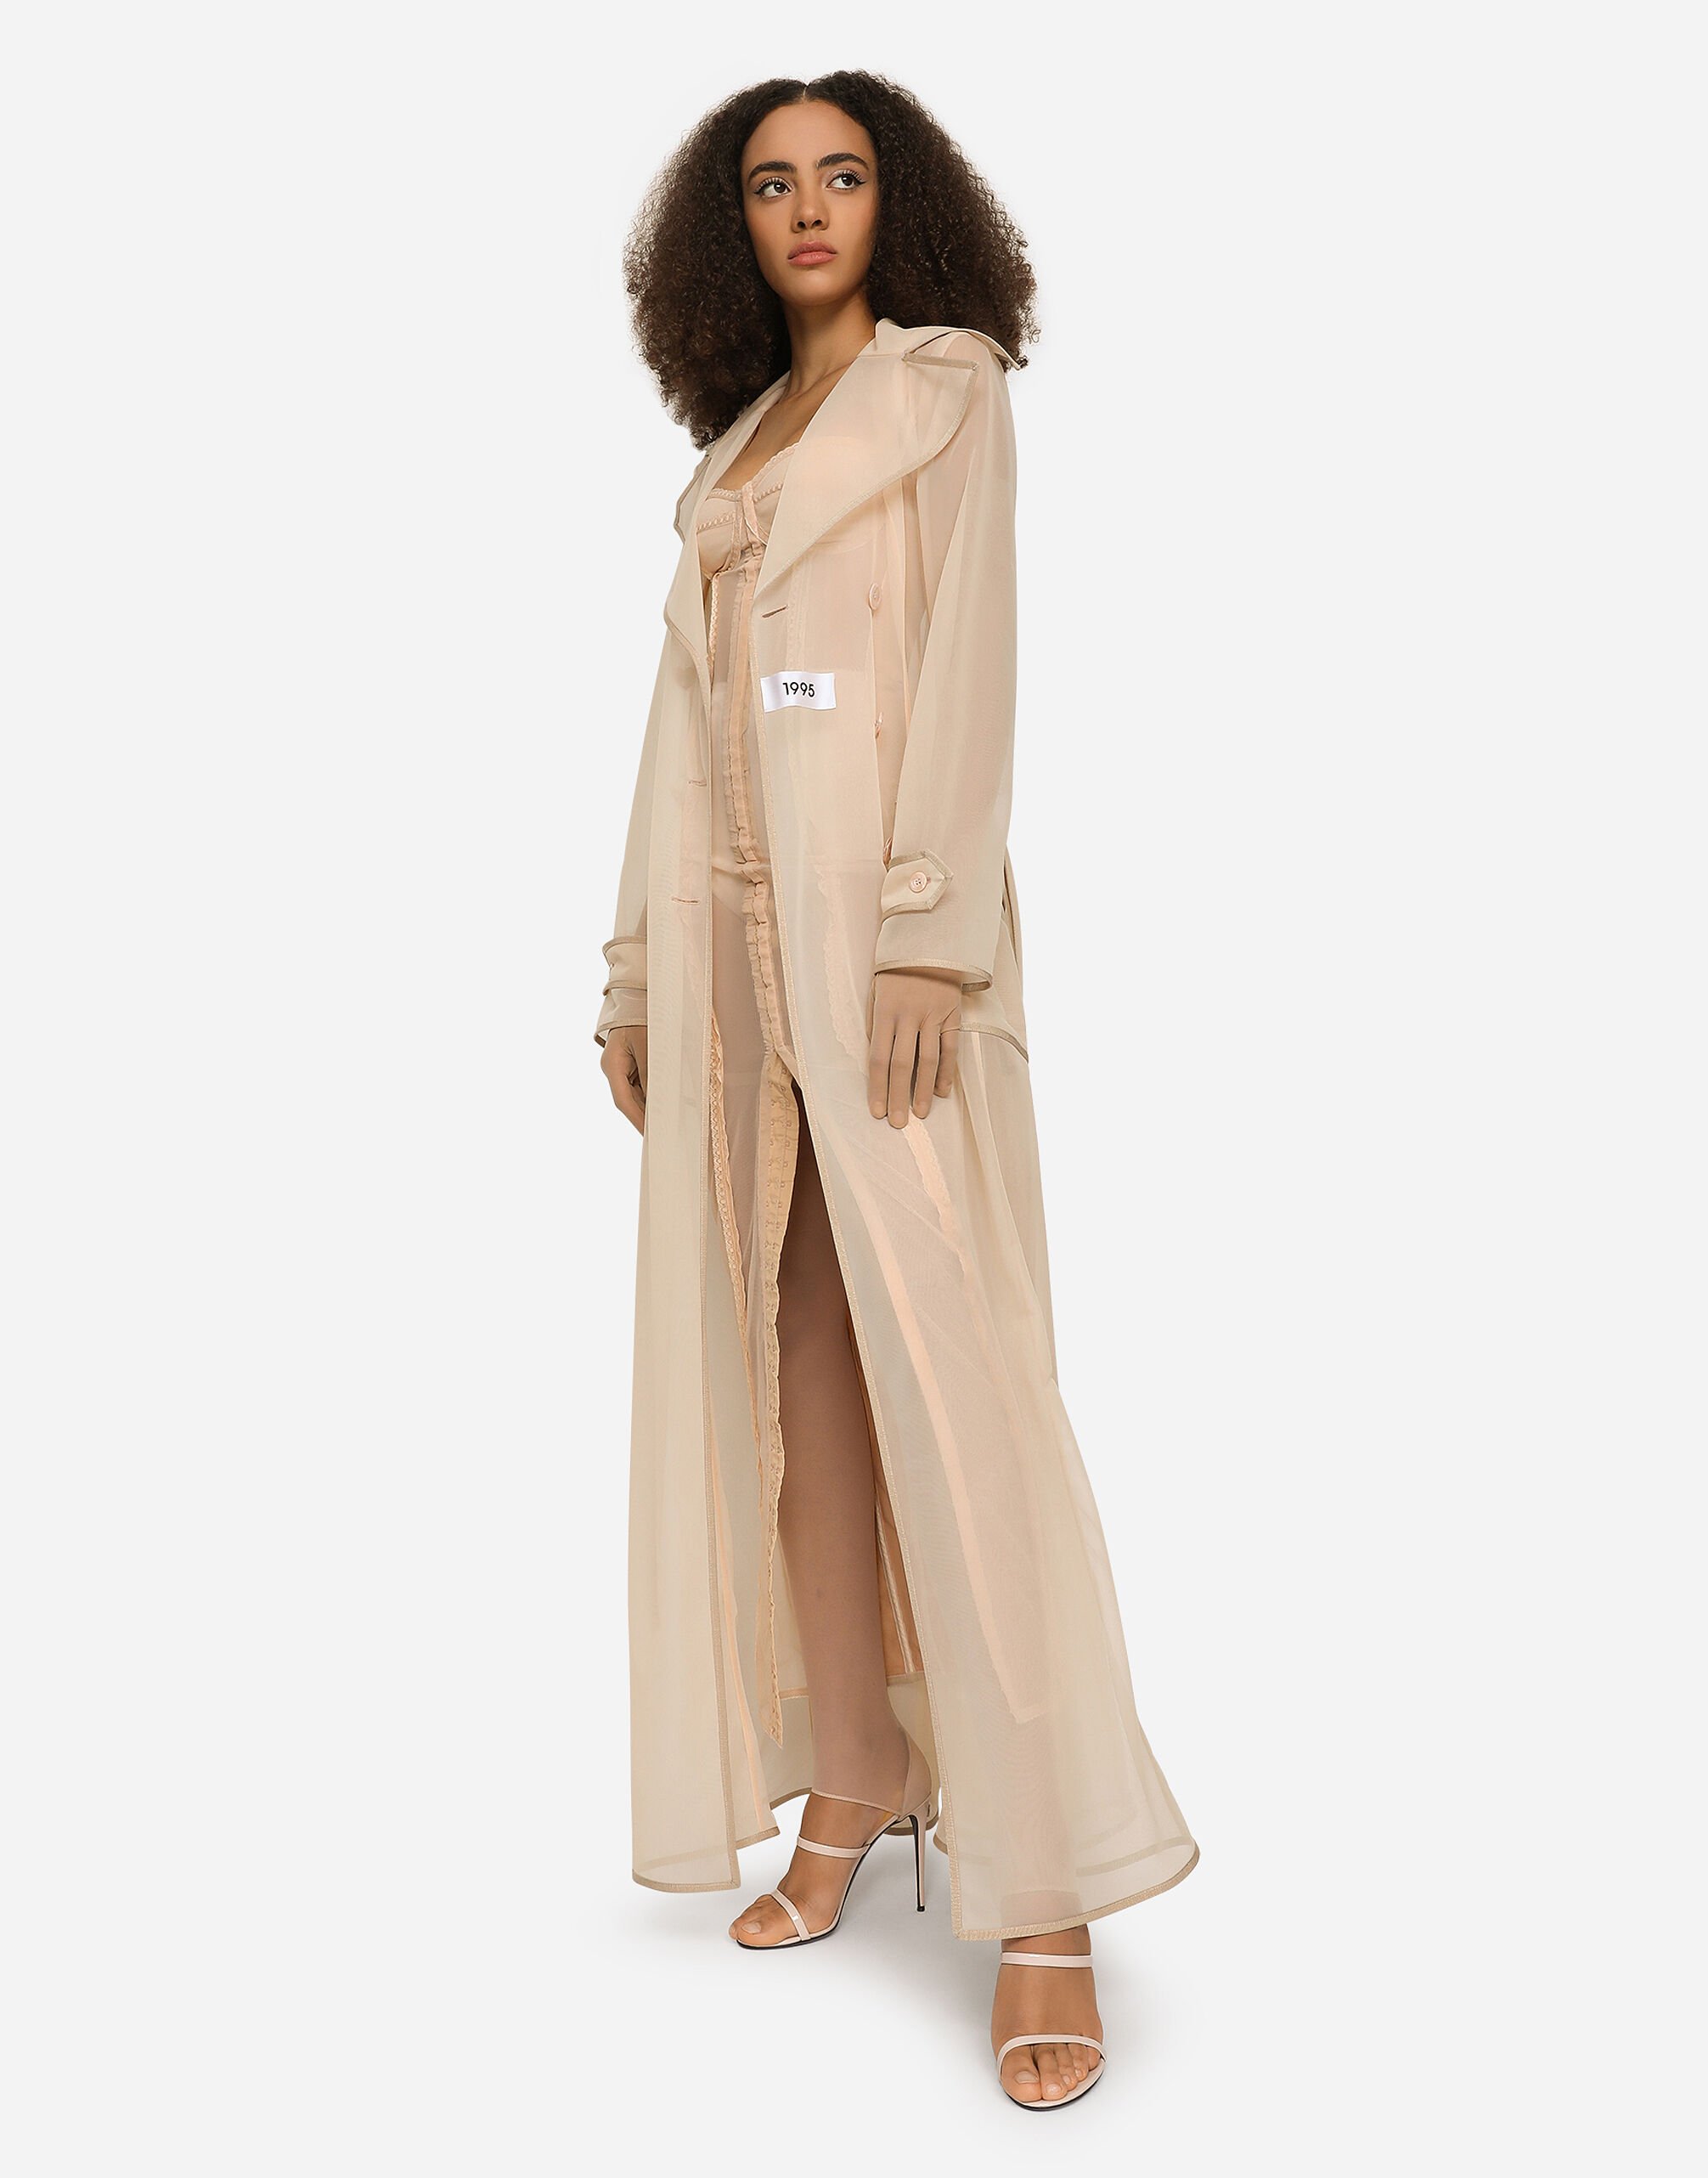 KIM DOLCE&GABBANA Marquisette trench coat with belt in Pale Pink 